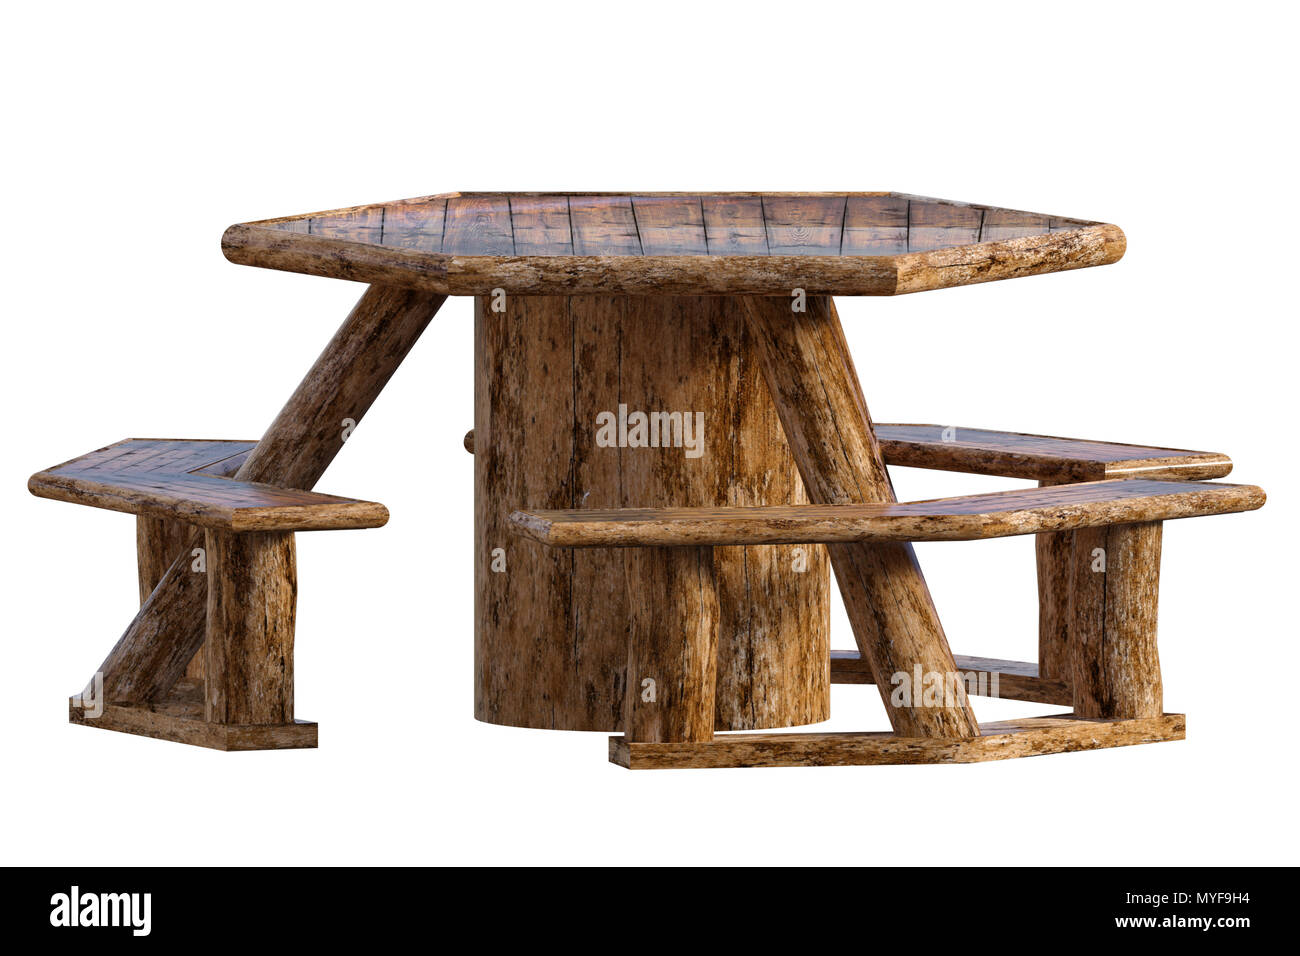 Wooden Picnic Table And Chairs Isolated On White 3d Render Stock